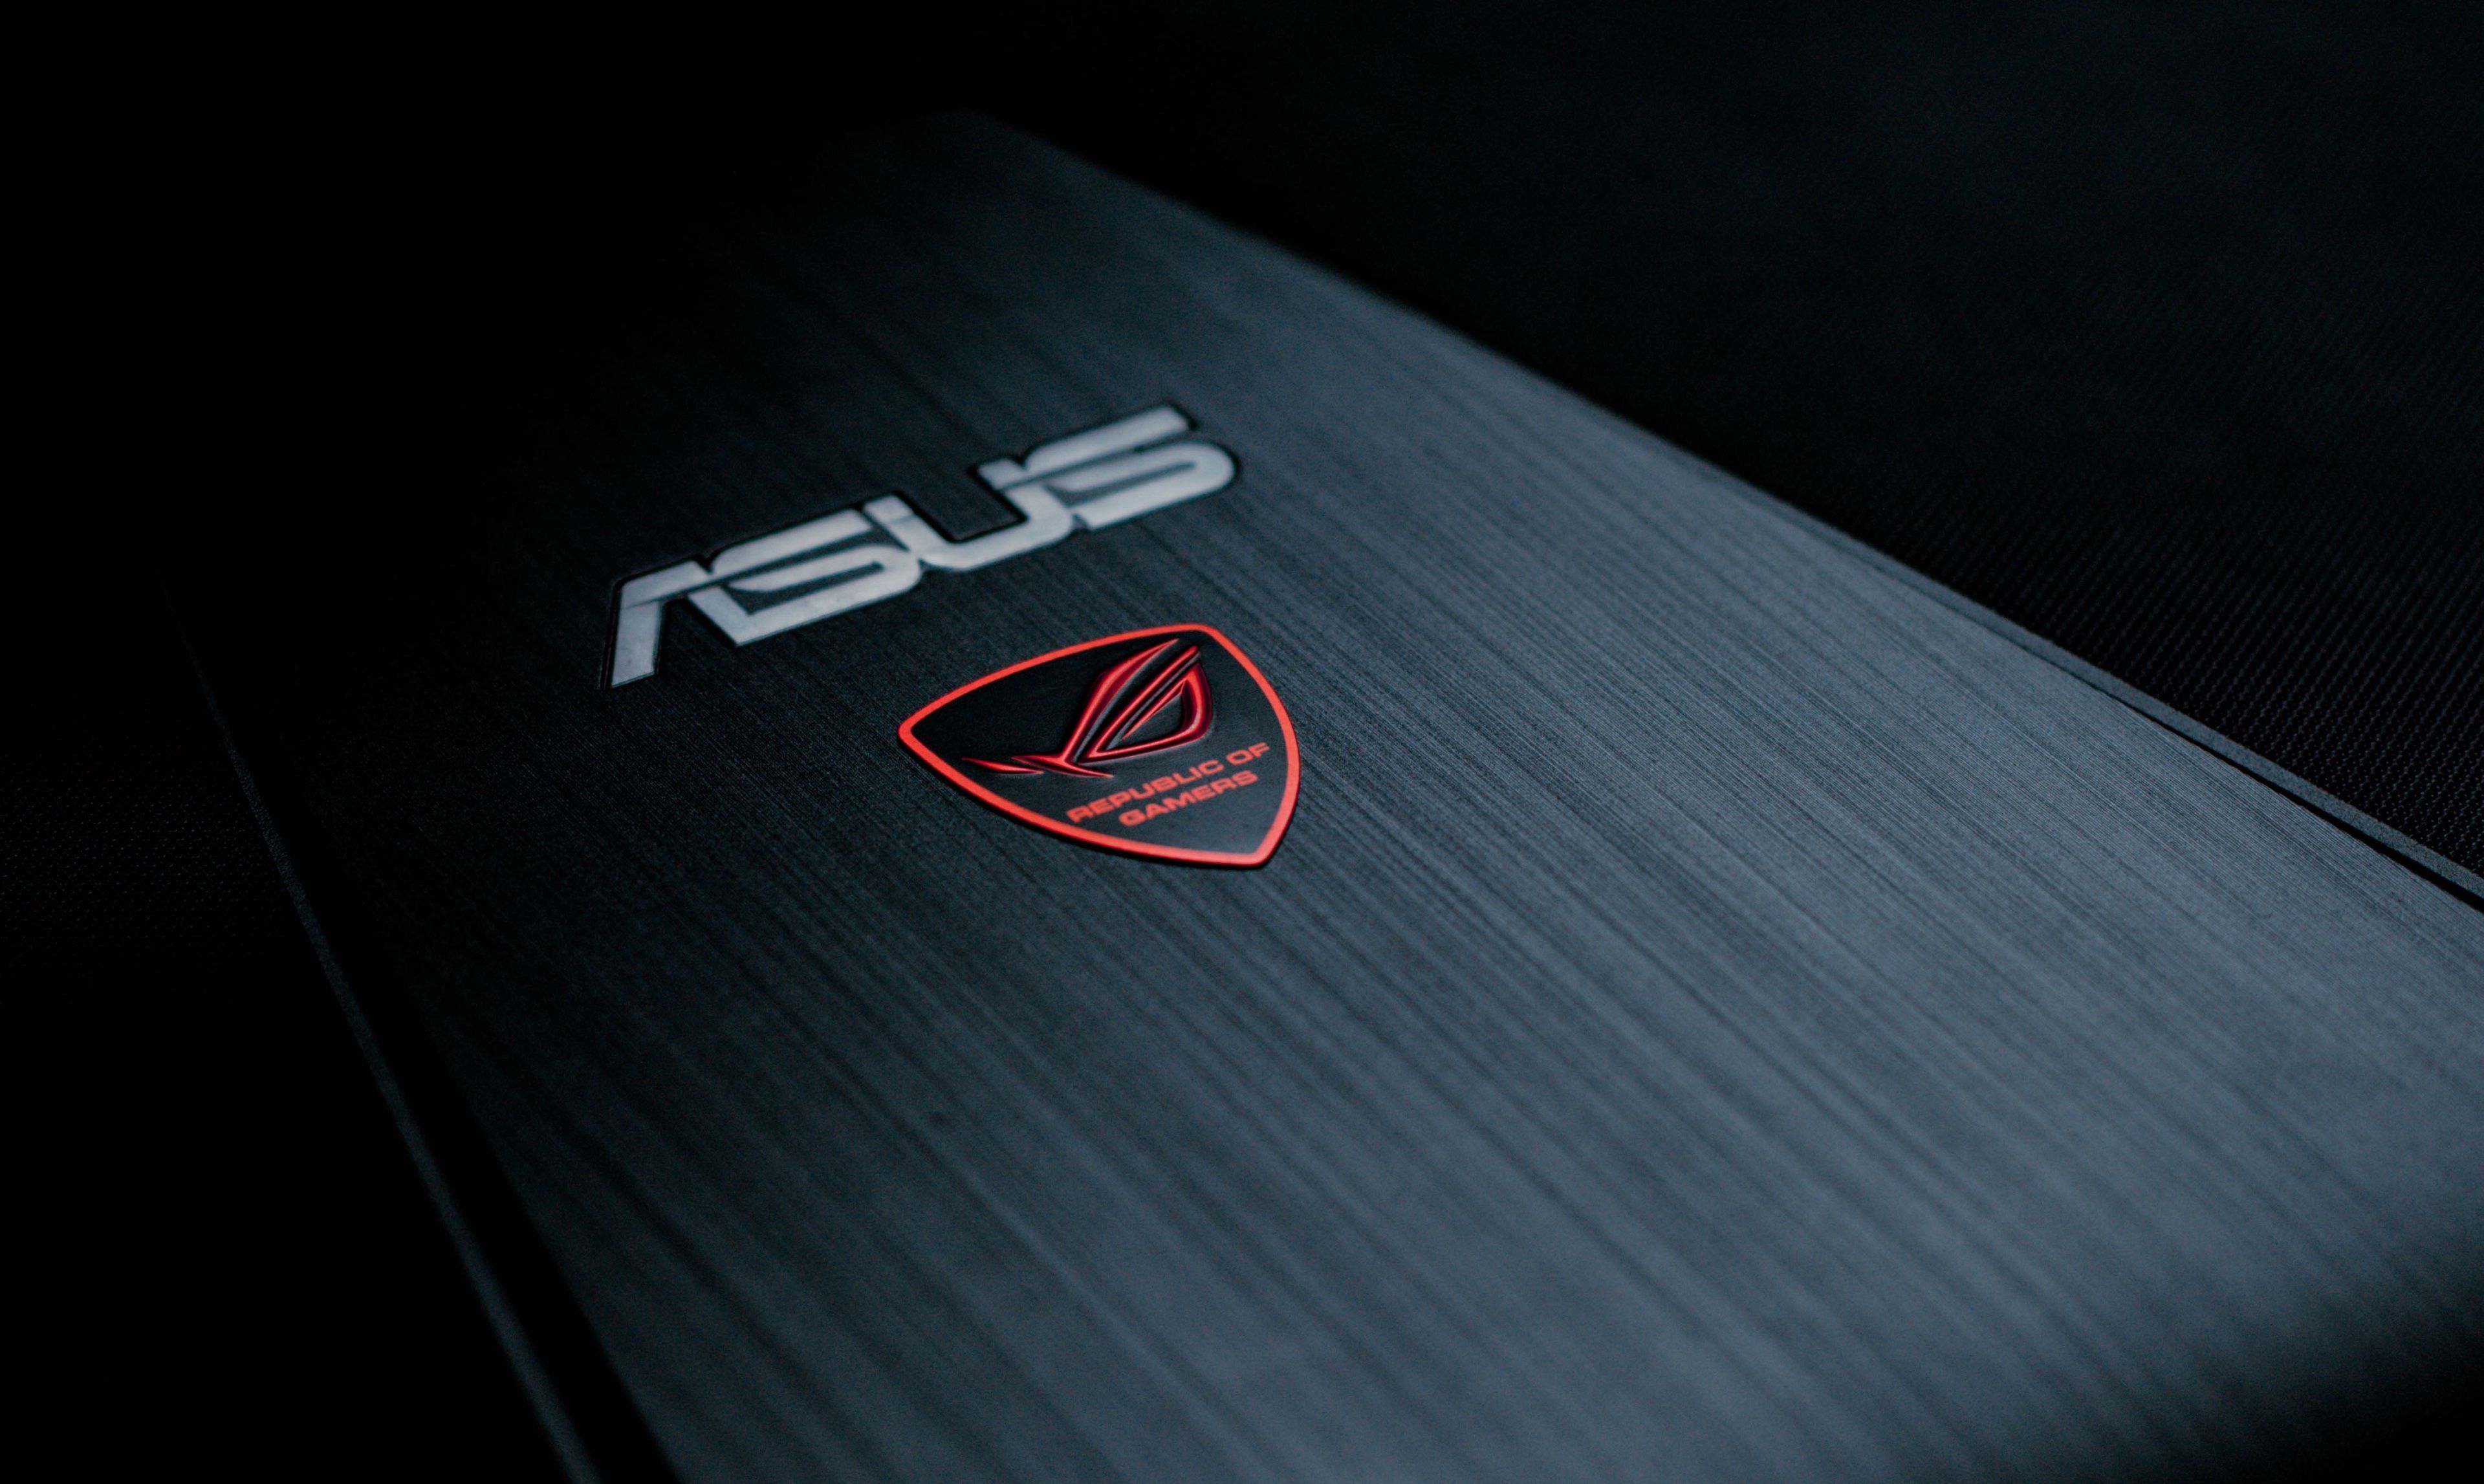 HD wallpaper: Asus logo, brand, rog, metallic, backgrounds, steel, hole,  perforated | Wallpaper Flare